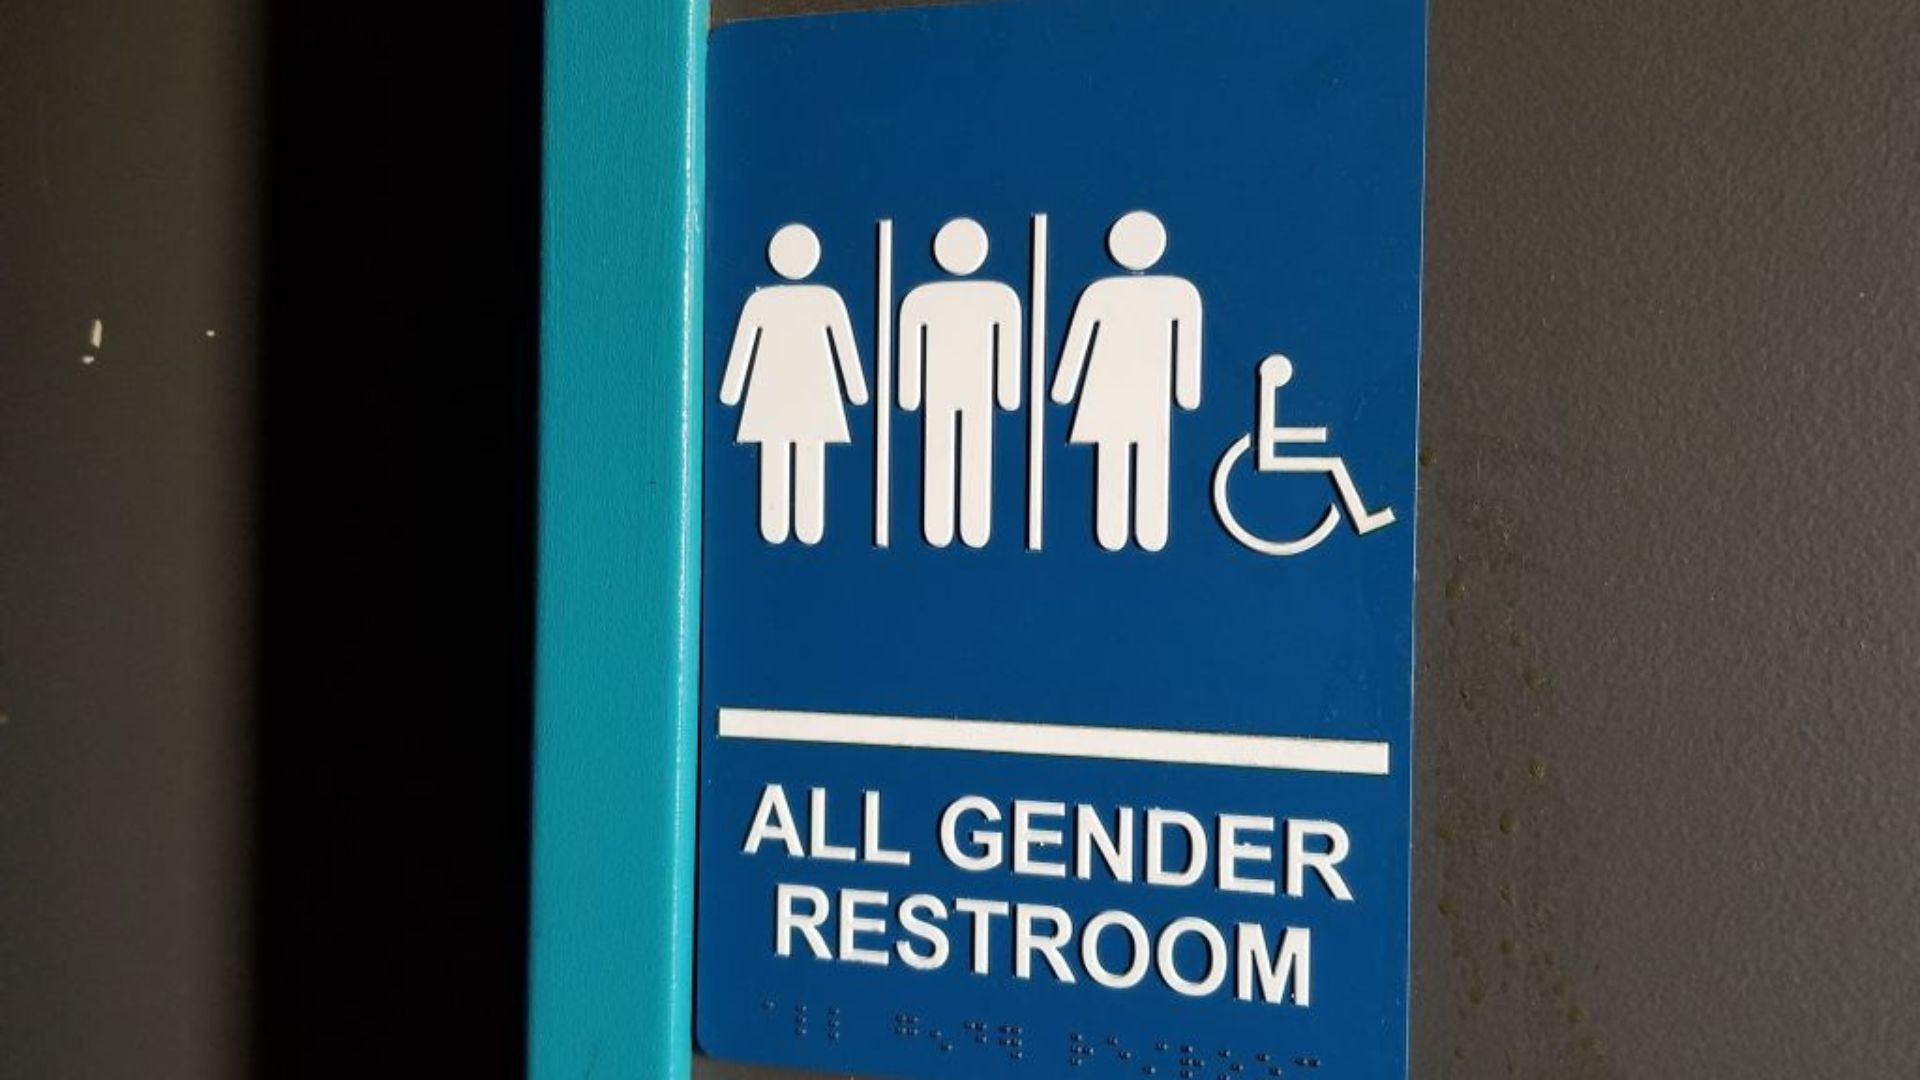 A sign on a wall indicating an 'All Gender Restroom' with pictograms of a woman, a person with no gender indication, a man, and a wheelchair symbol for accessibility